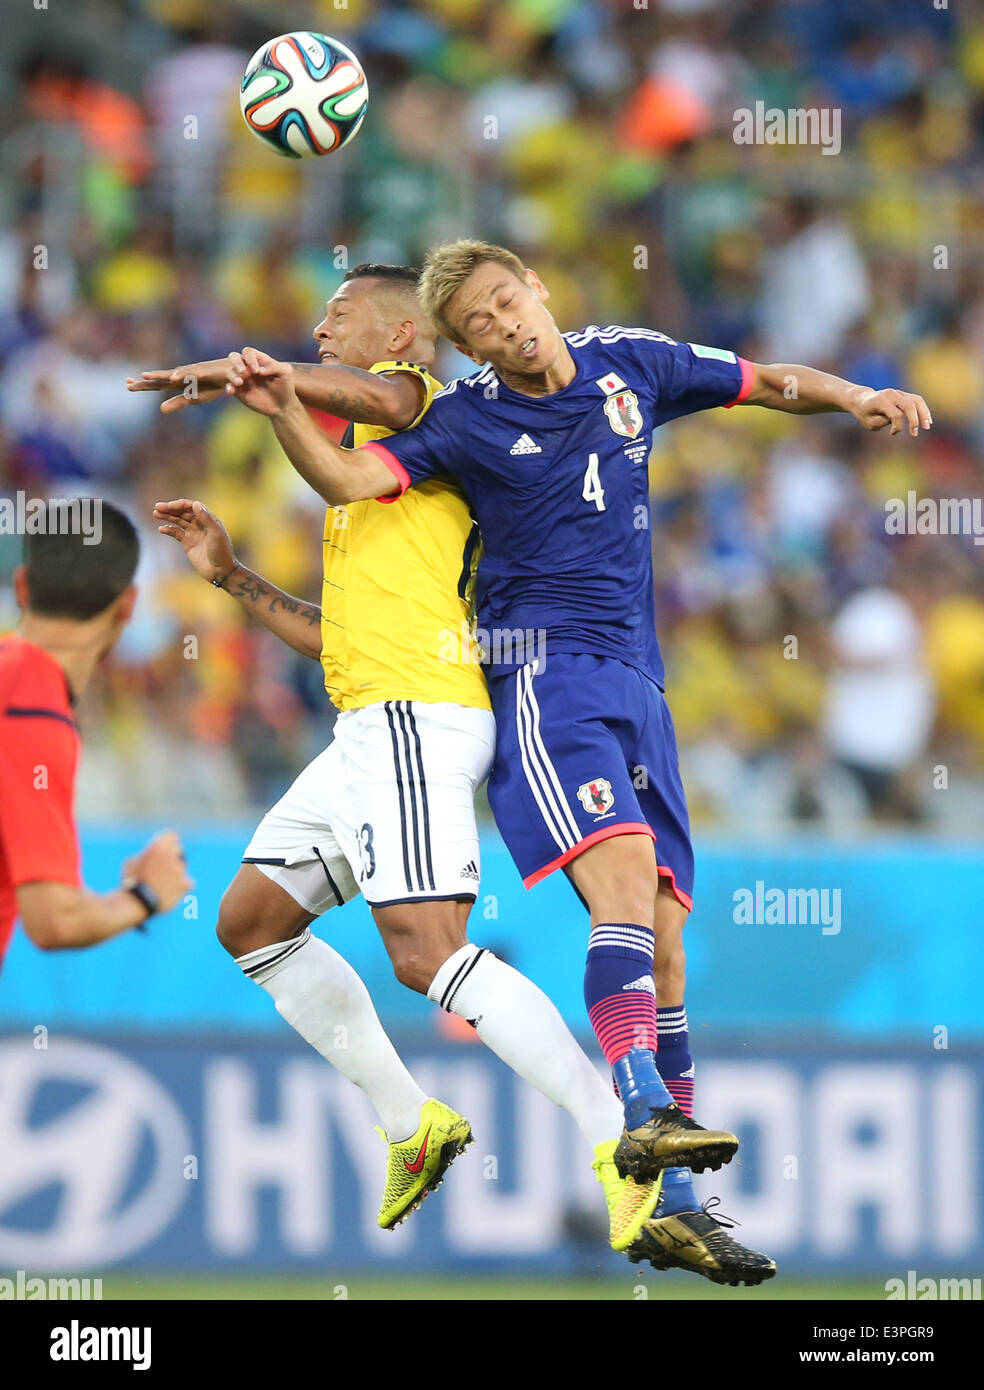 (140624) -- CUIABA, June 24, 2014 (Xinhua) -- Japan's Keisuke Honda jumps for a header during a Group C match between Japan and Colombia of 2014 FIFA World Cup at the Arena Pantanal Stadium in Cuiaba, Brazil, June 24, 2014. (Xinhua/Li Ming) Stock Photo